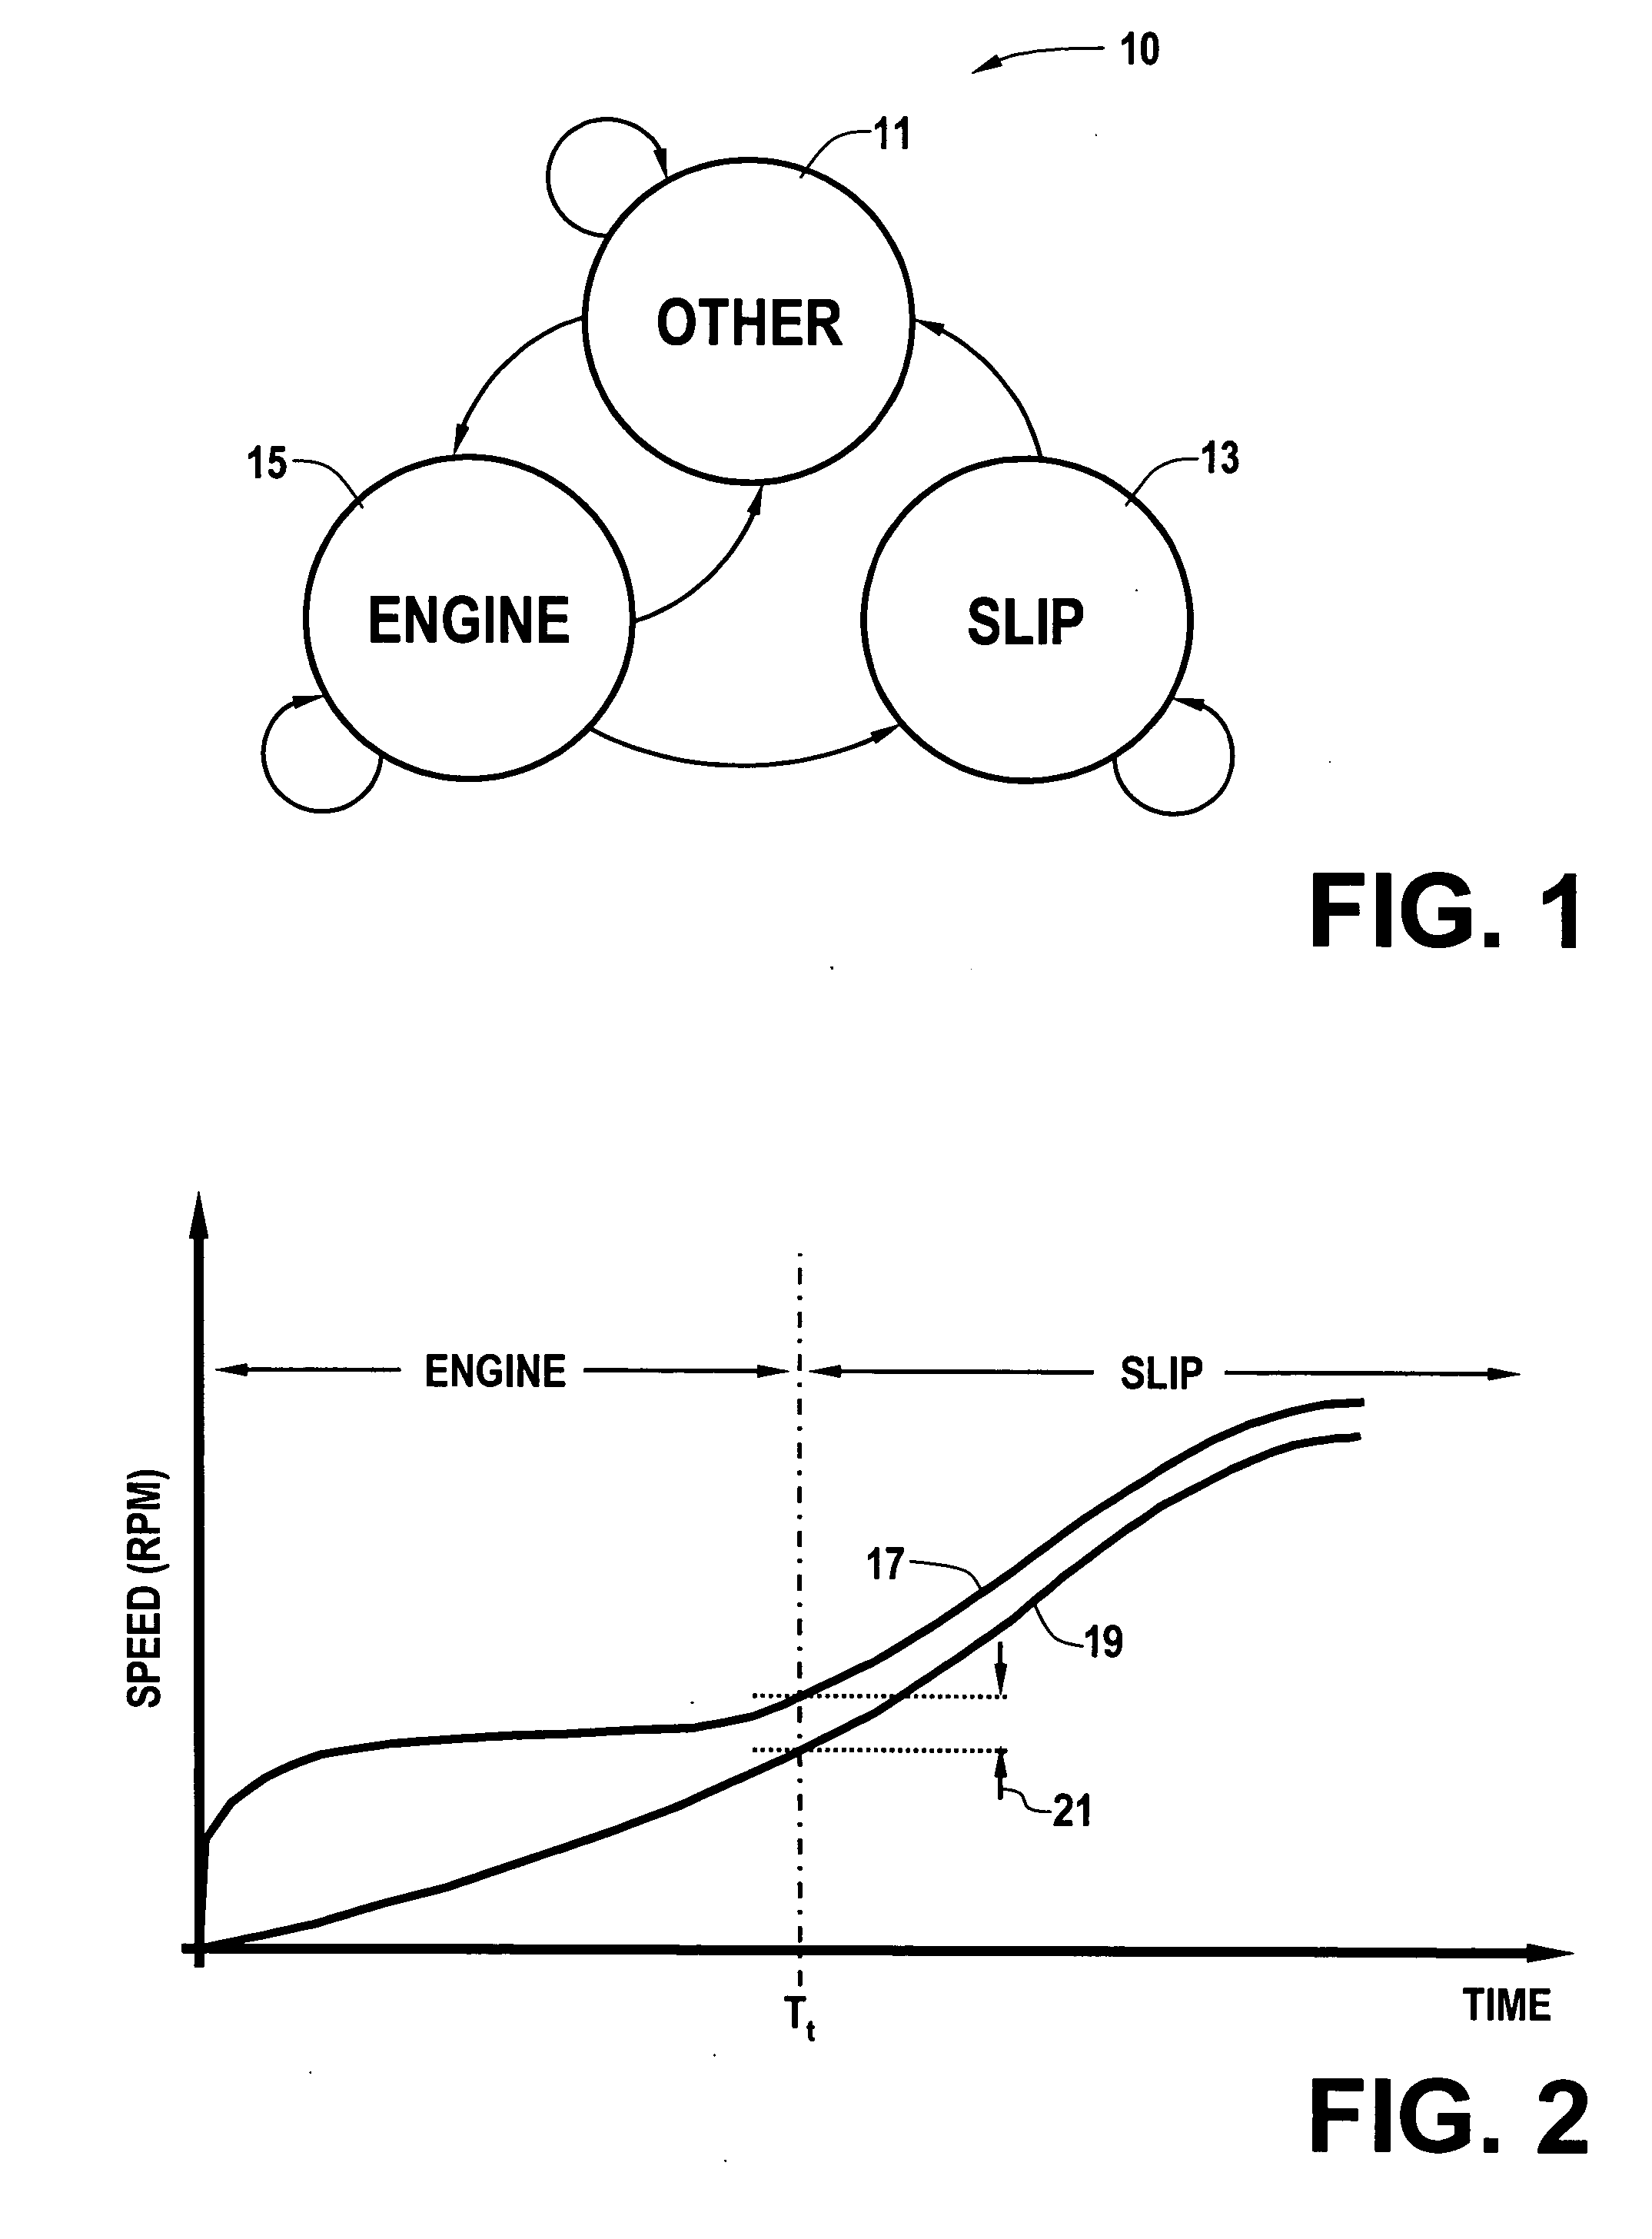 Engine and driveline torque transfer device control